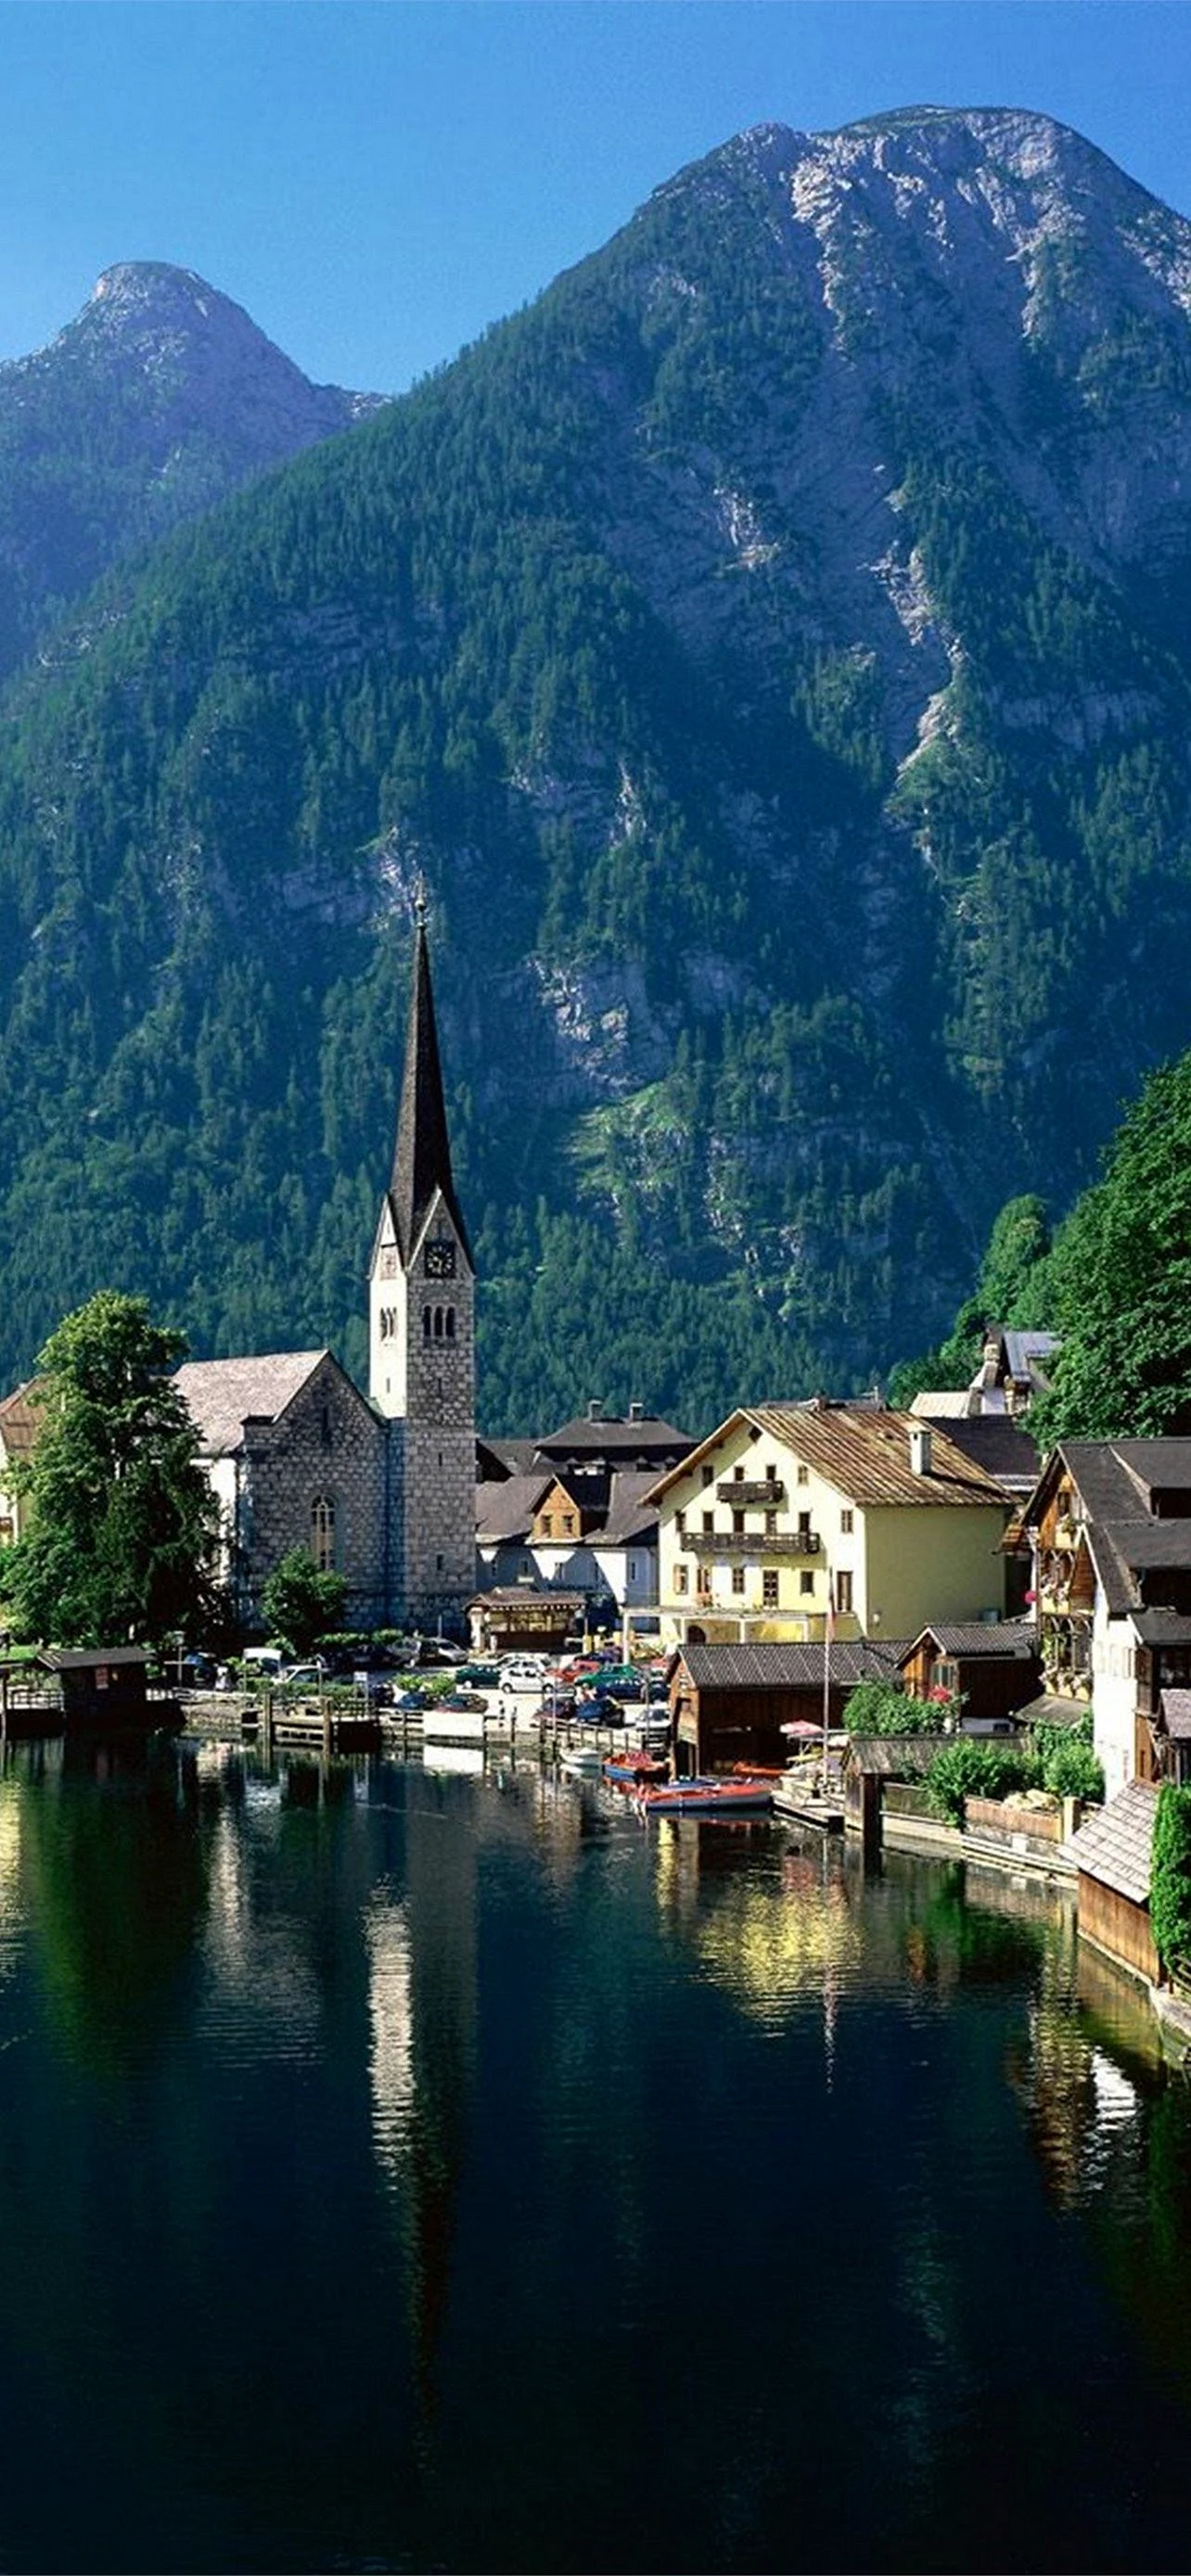 Mountain Village Wallpaper for iPhone 12 Pro Max